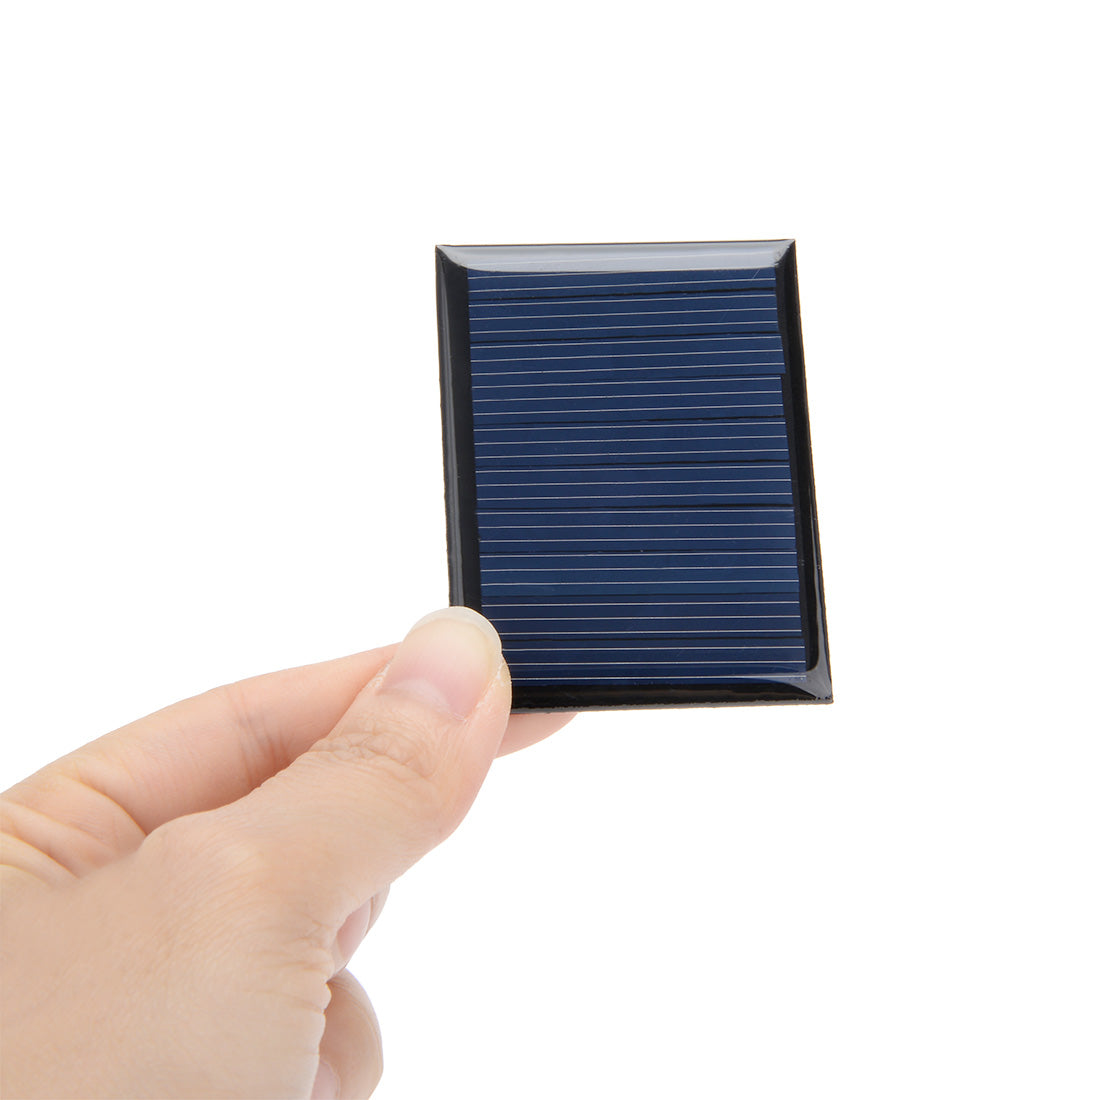 uxcell Uxcell 5Pcs 5V 50mA Poly Mini Solar Cell Panel Module DIY for Phone Light Toys Charger 60mm x 44mm